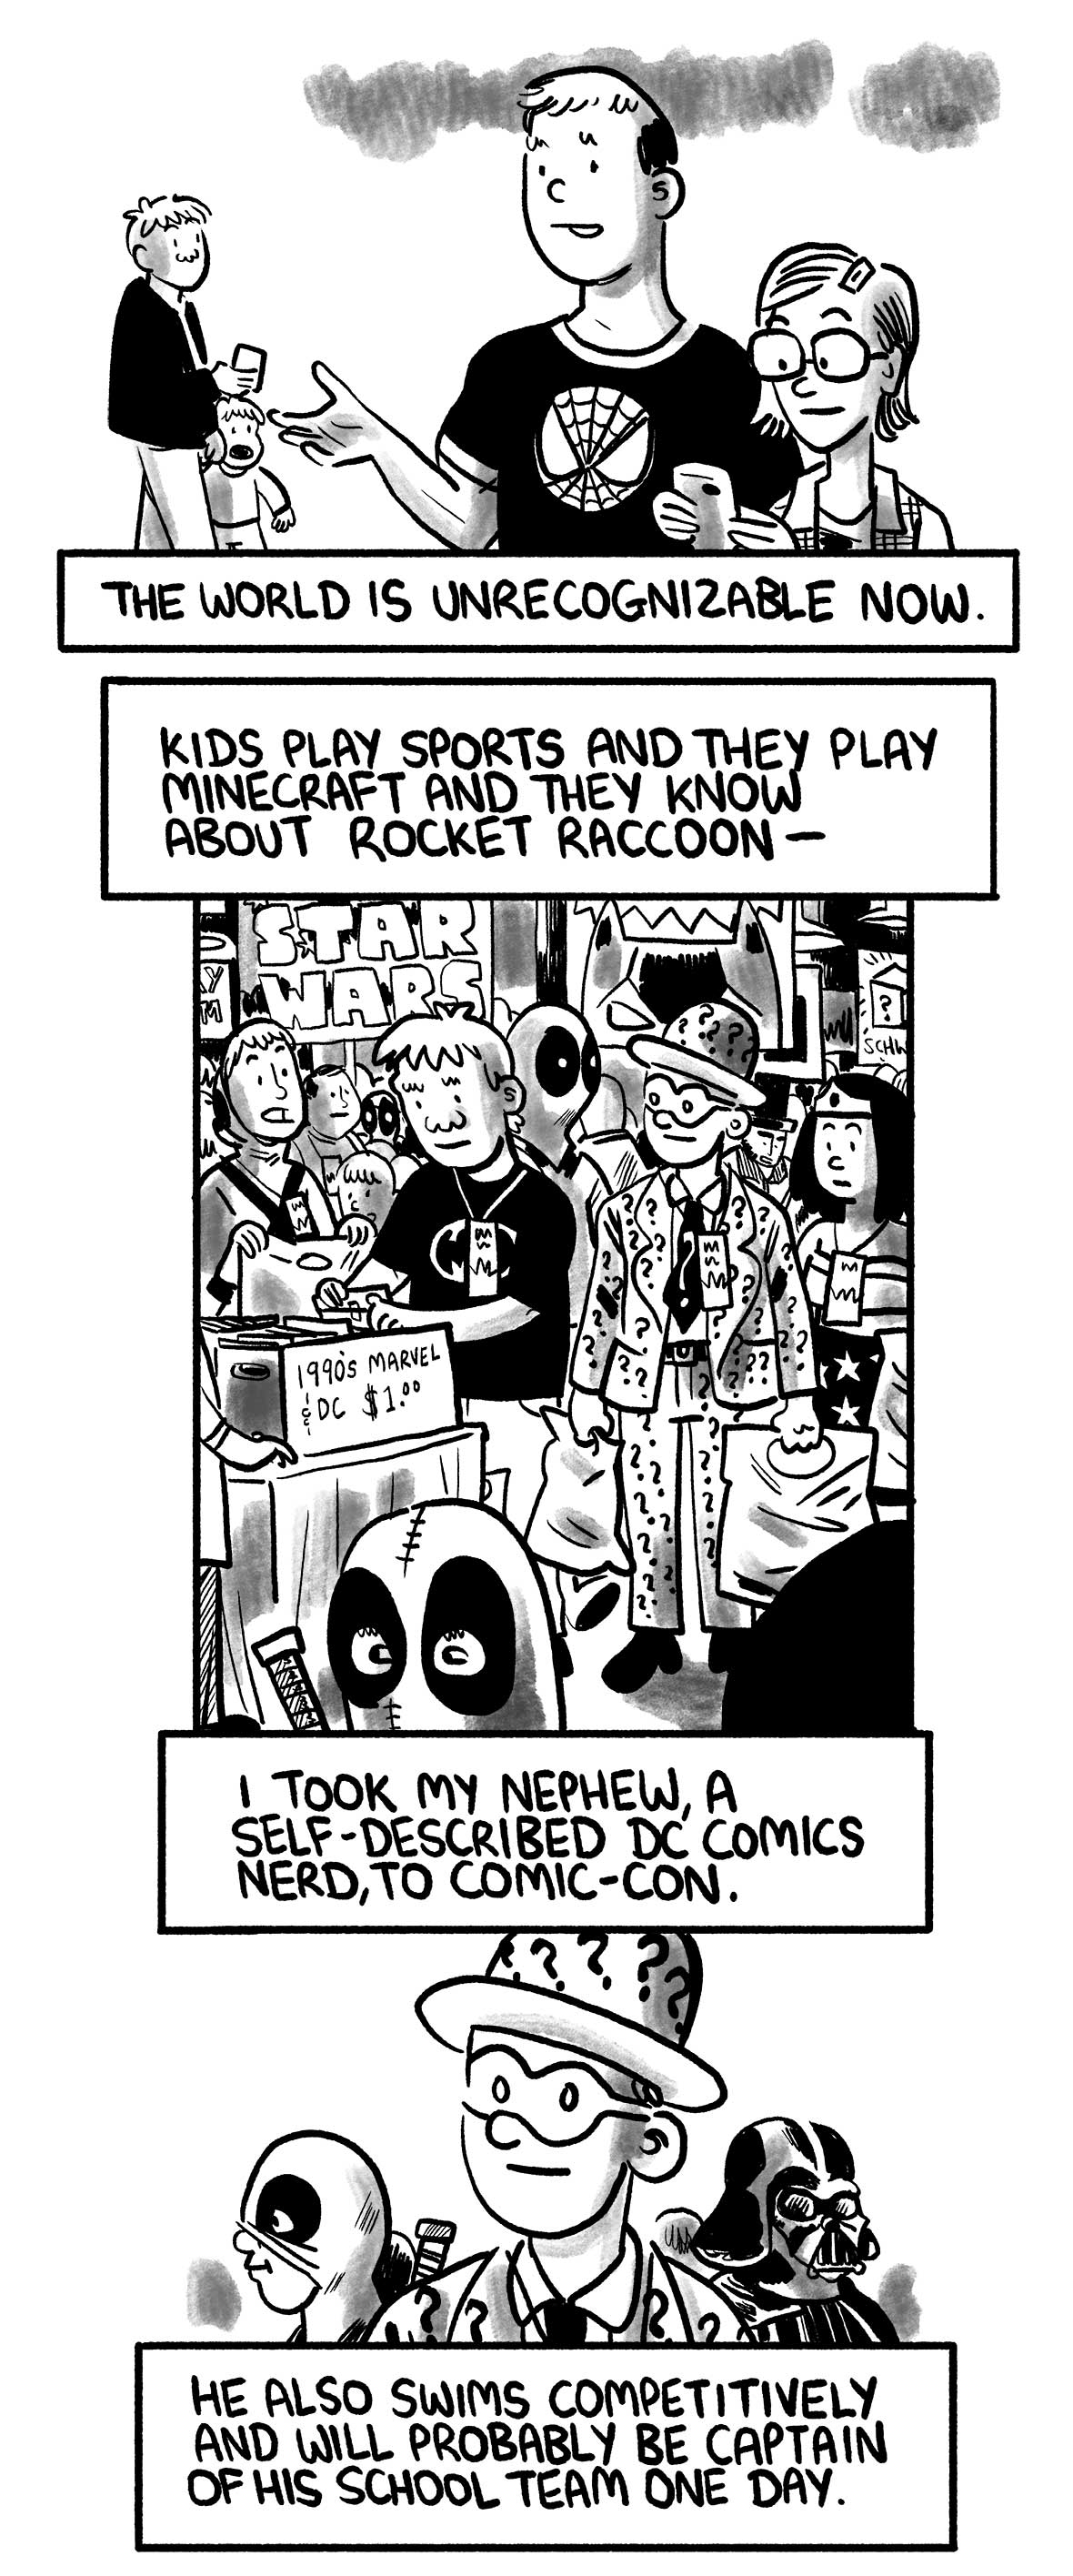 Back to the present. Several people are depicted who are neither jocks nor nerds.  The narrator says: “The world is unrecognizable now.” “Kids play sports and they play Minecraft and they know about Rocket Raccoon—”  At a convention, the narrator wearing a Batman T-shirt flips through a box of old comic books while his nephew, dressed as the Riddler, looks on.  The narrator says: “I took my nephew, a self-described DC Comics nerd, to Comic-Con.” “He also swims competitively and will probably be captain of his school team one day.”